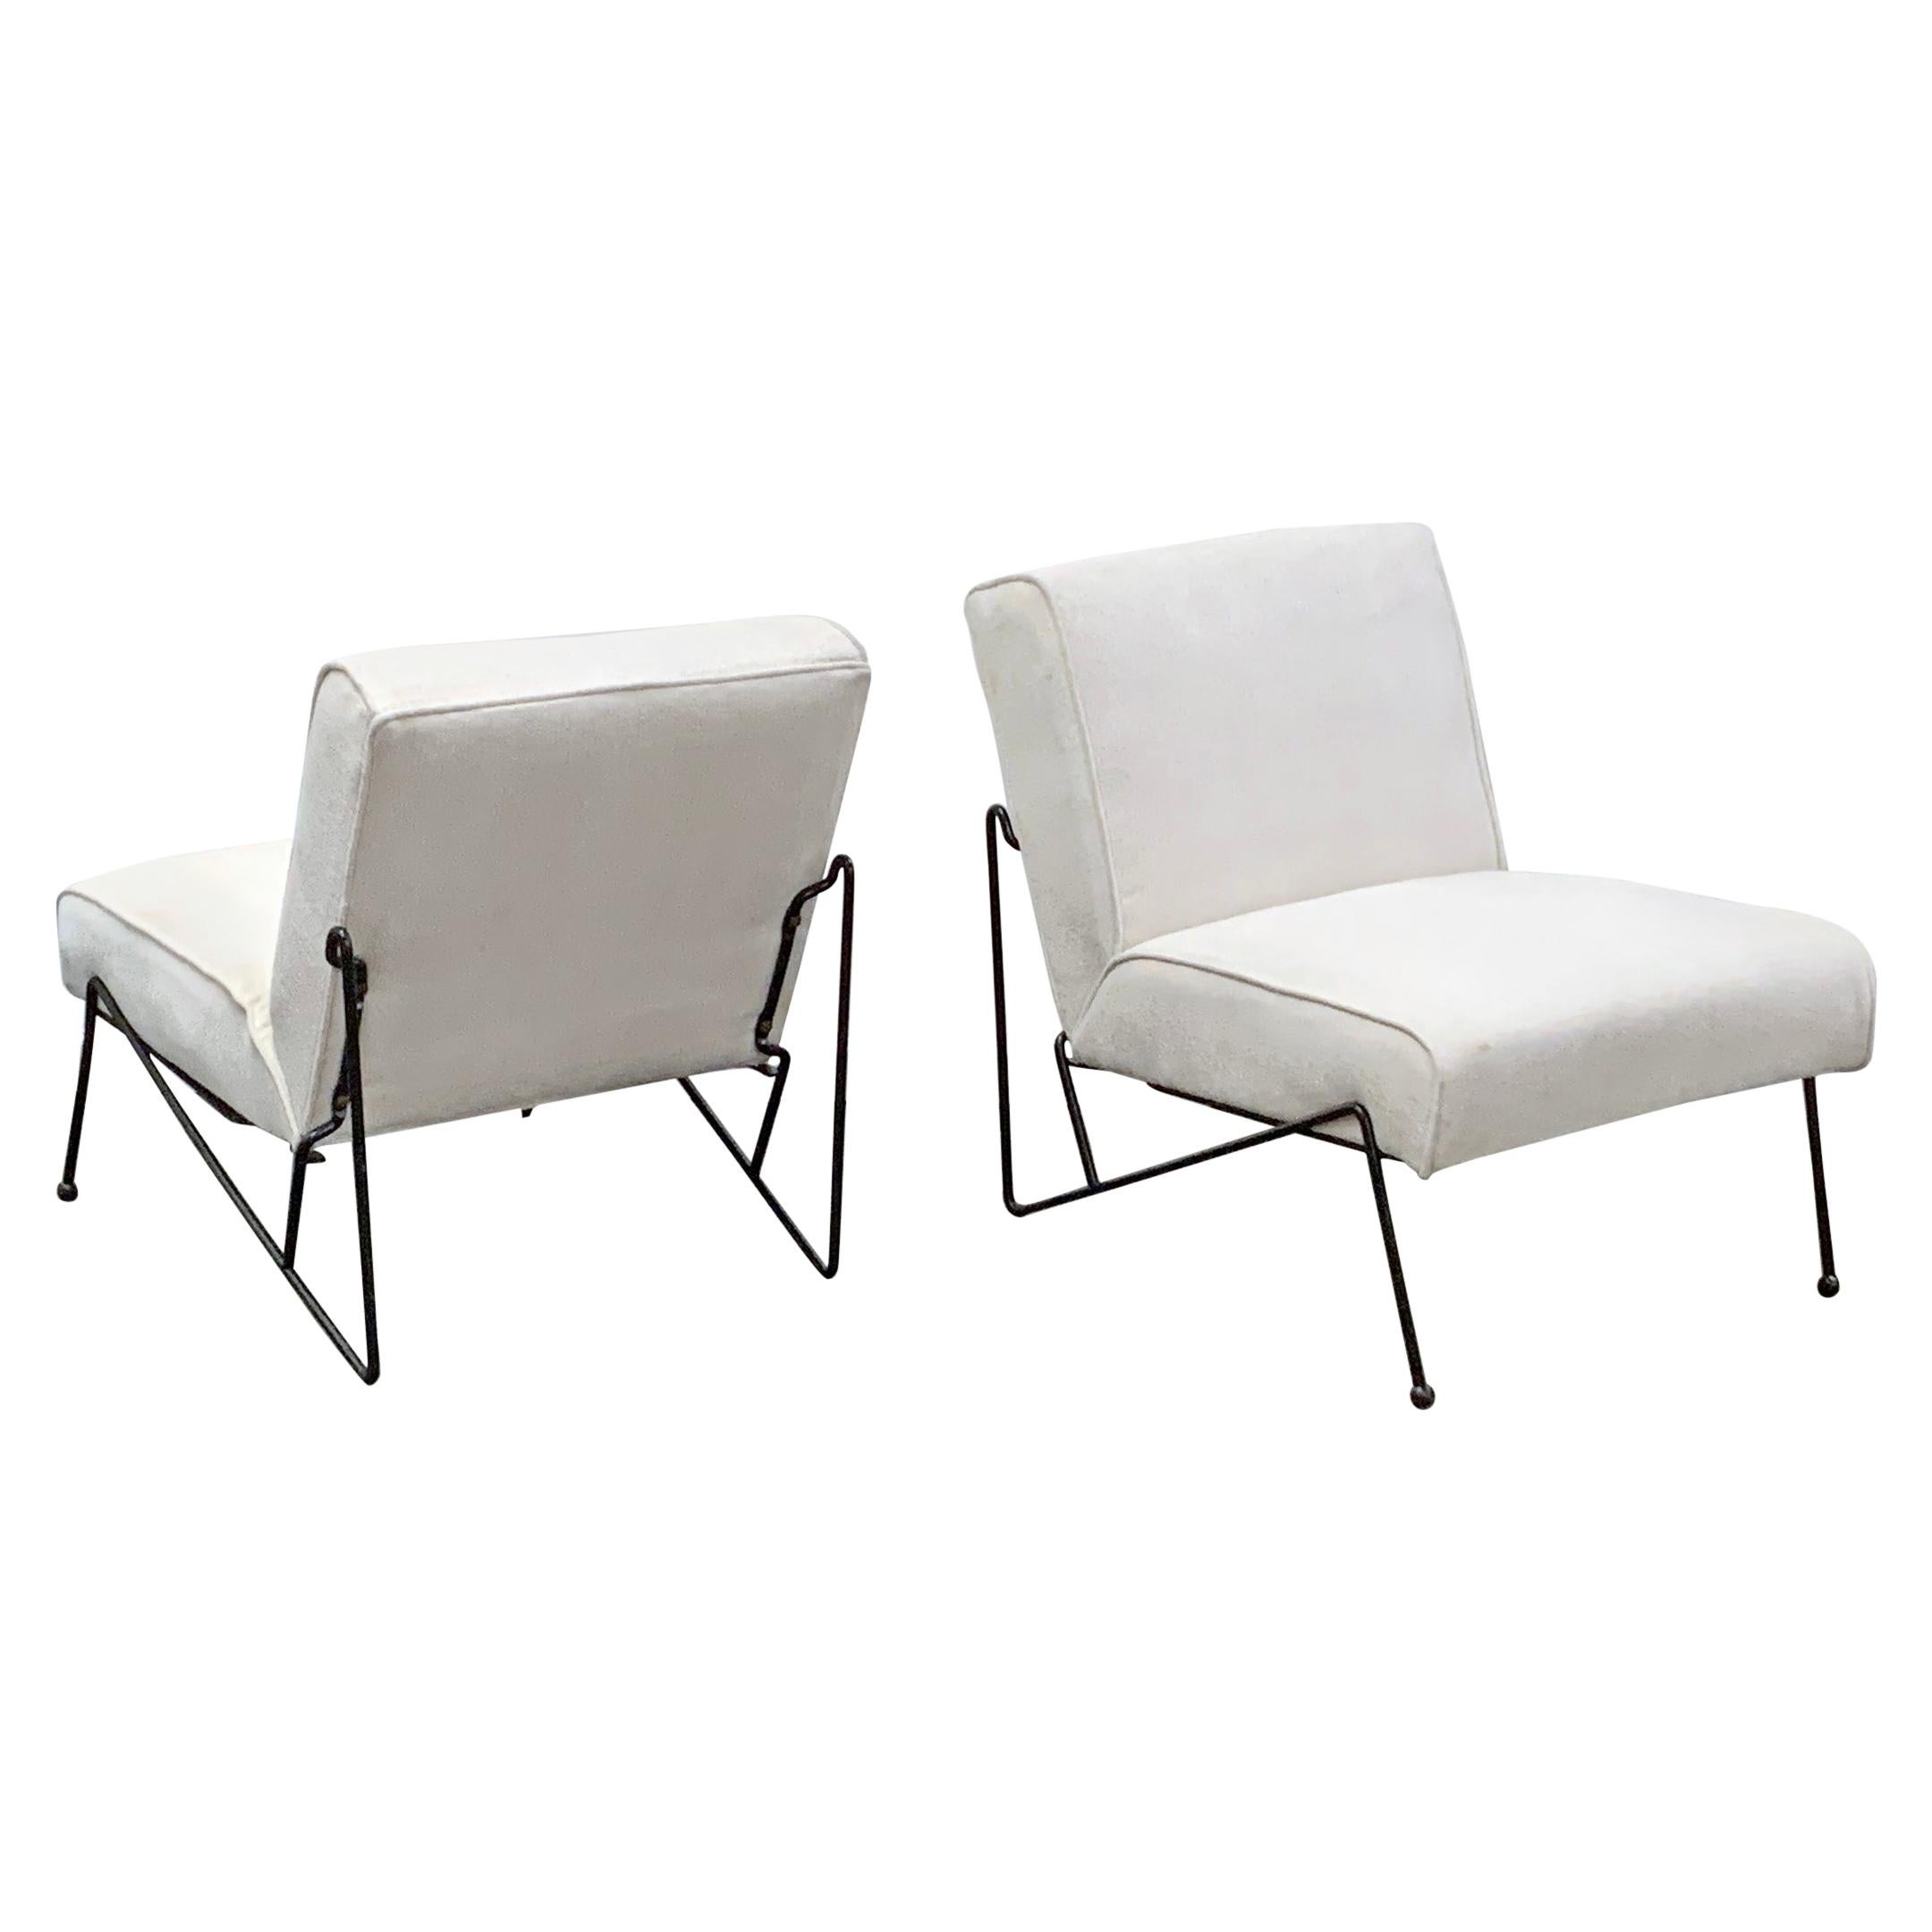 Dan Johnson for Pacific Iron Lounge Chairs, a Pair